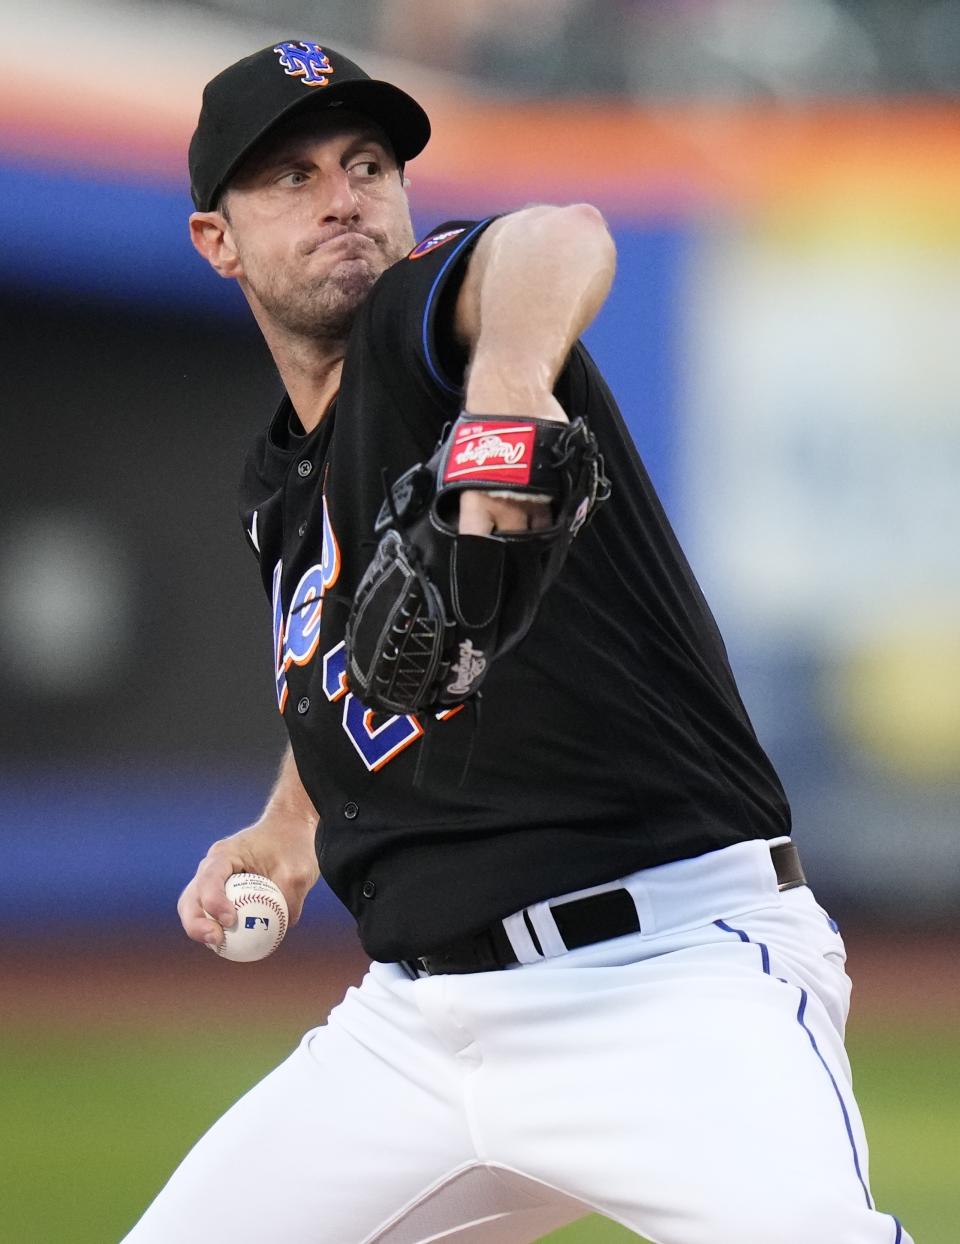 New York Mets' Max Scherzer winds up during the first inning of the team's baseball game against the Washington Nationals on Friday, July 28, 2023, in New York. (AP Photo/Frank Franklin II)